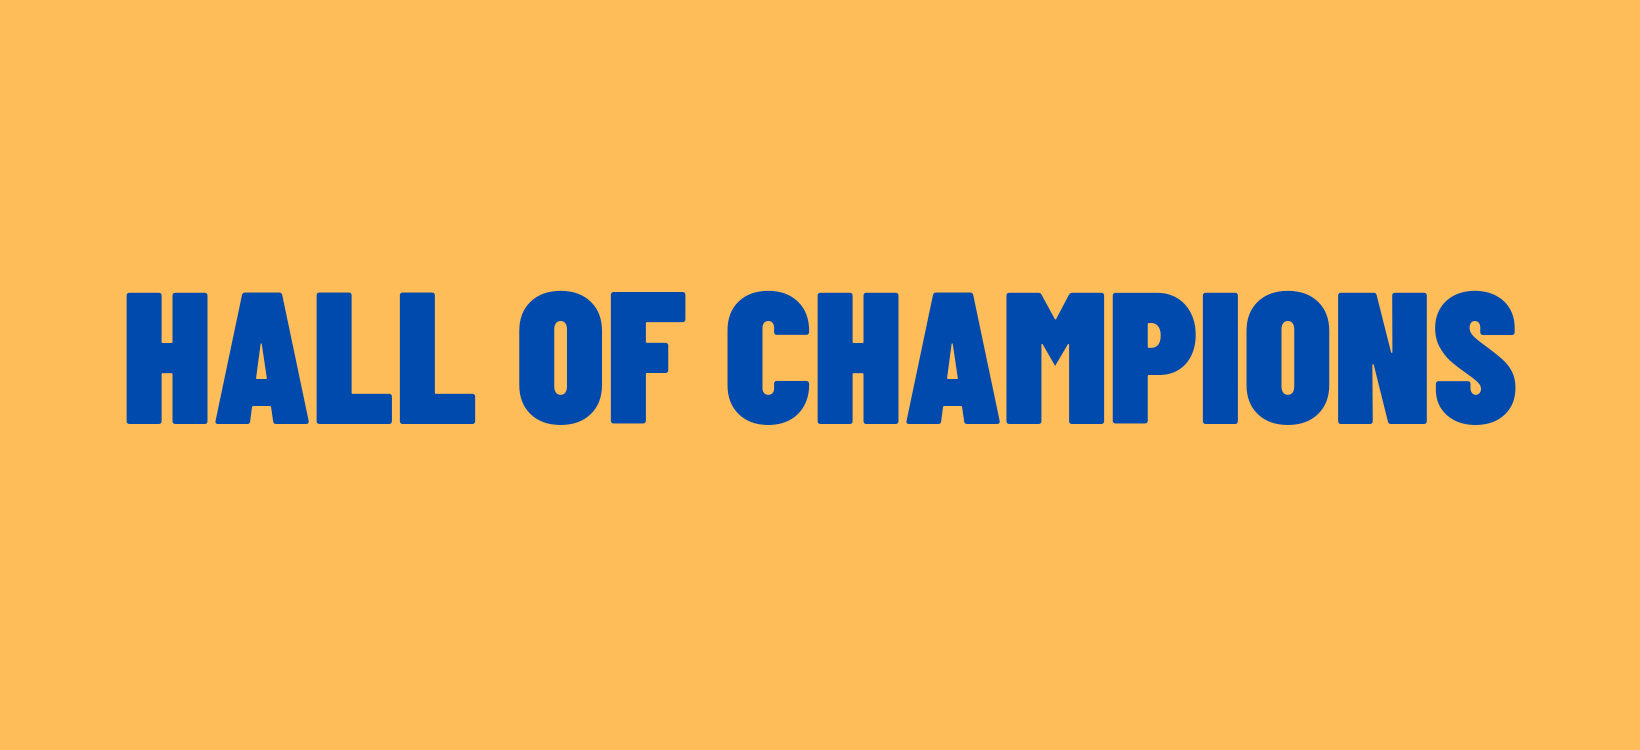 Image for Hall of Champions